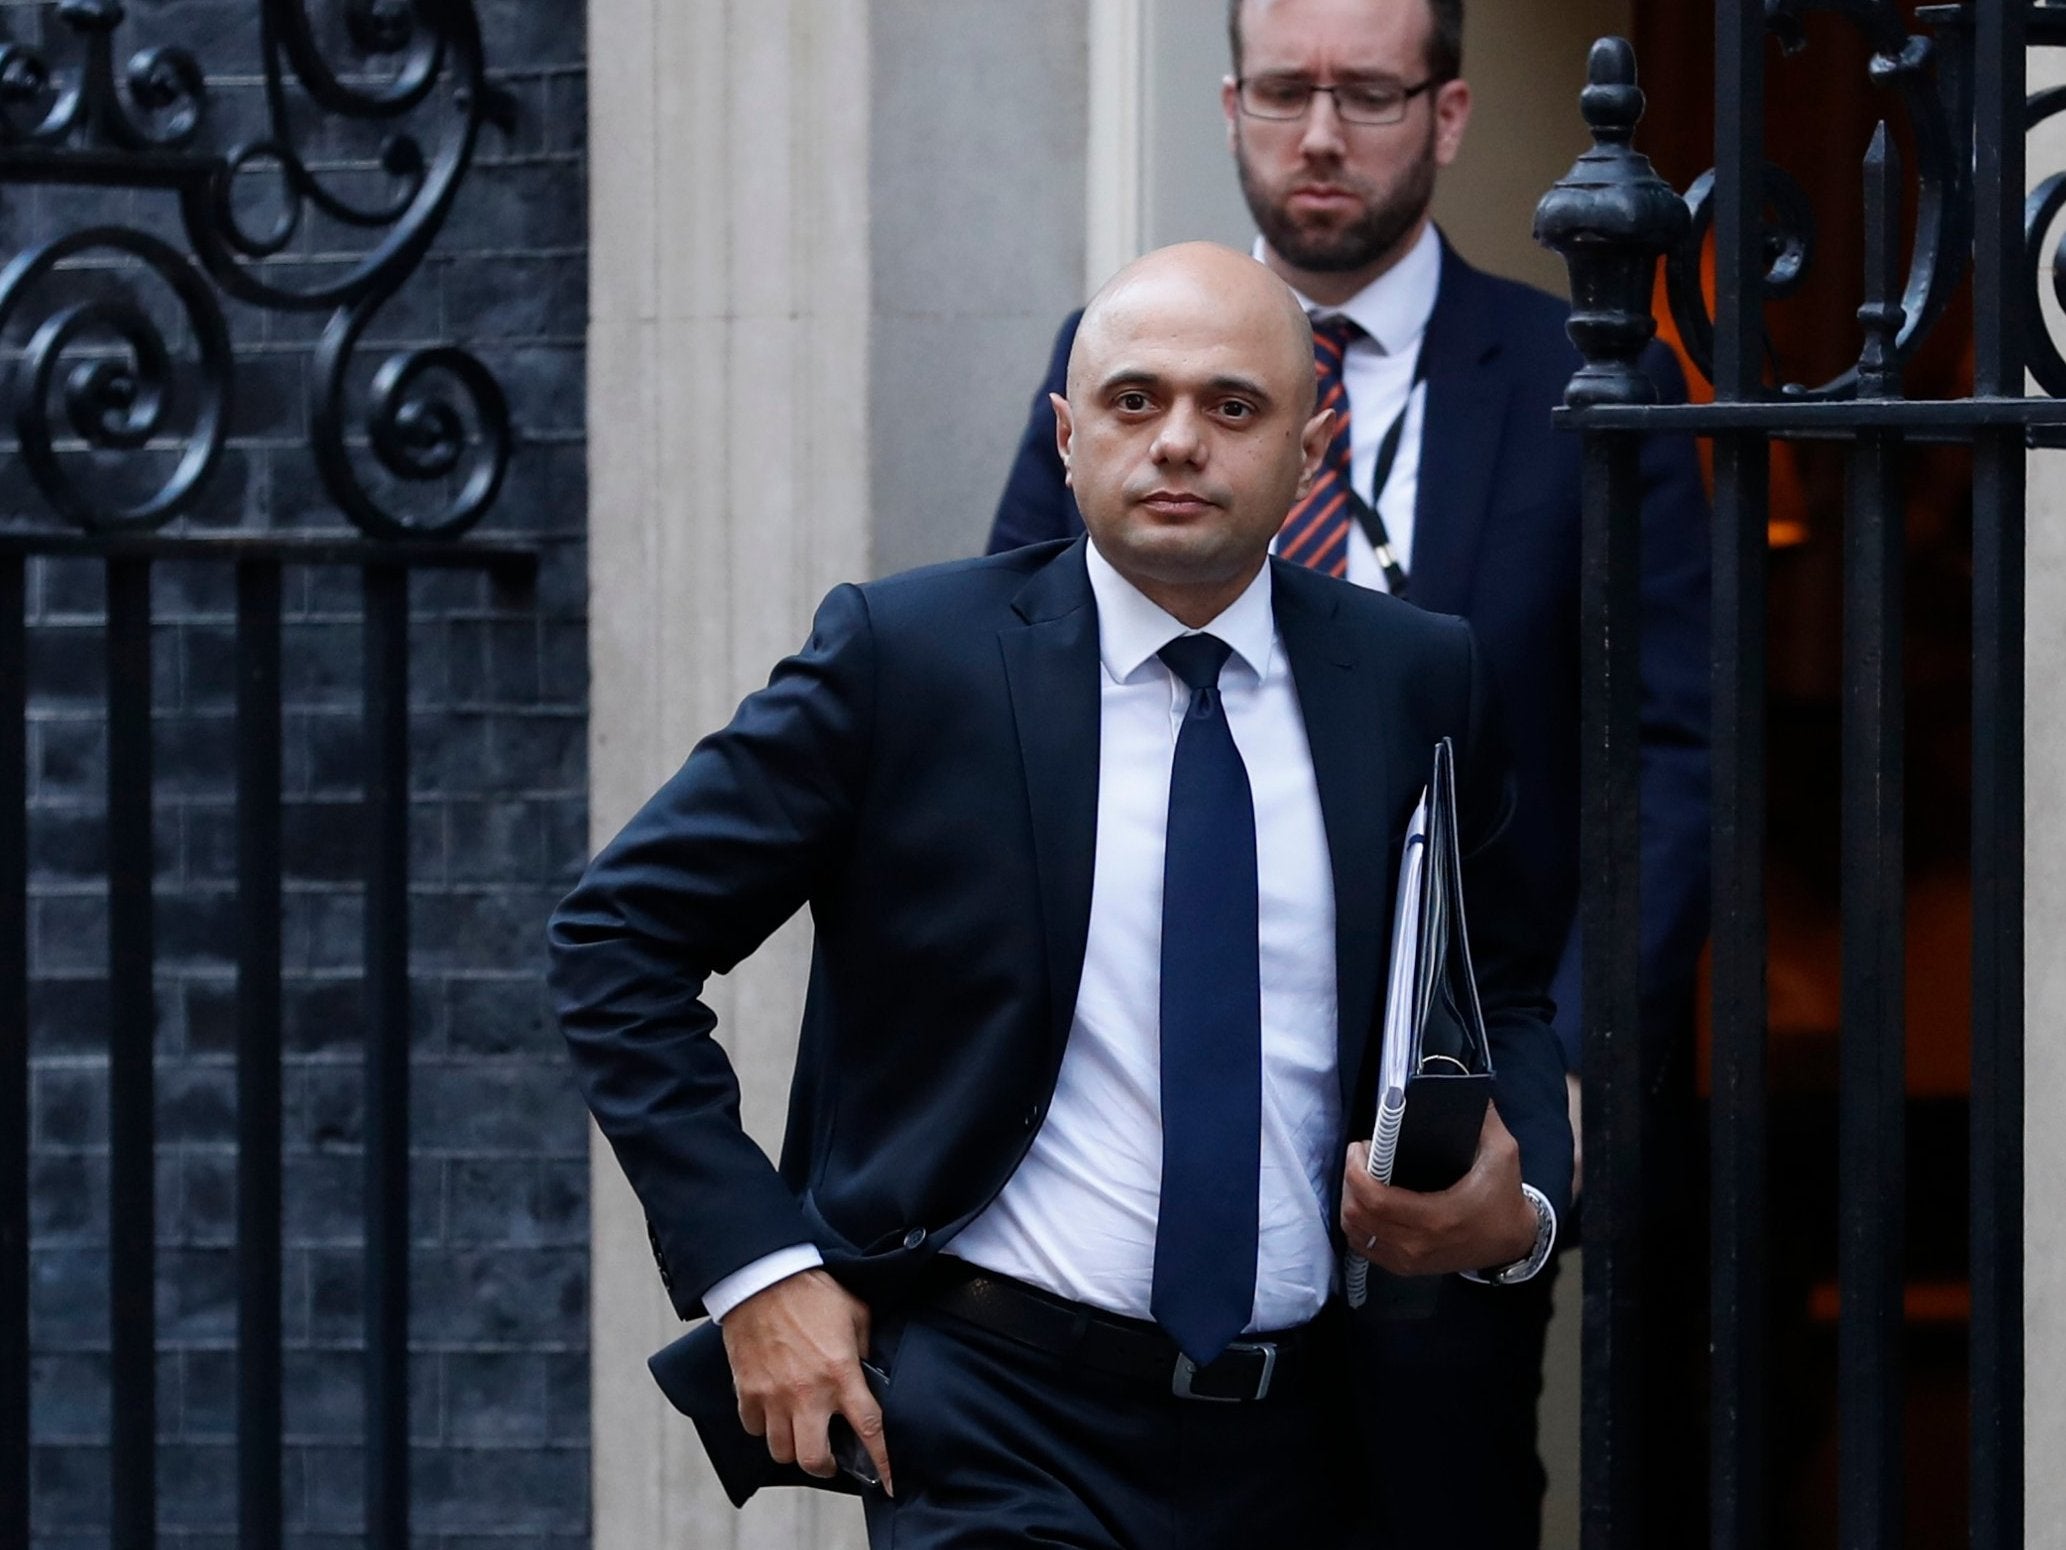 ‘There have long been calls to ban the whole group with the distinction between the two factions derided as smoke and mirrors,’ says home secretary Sajid Javid